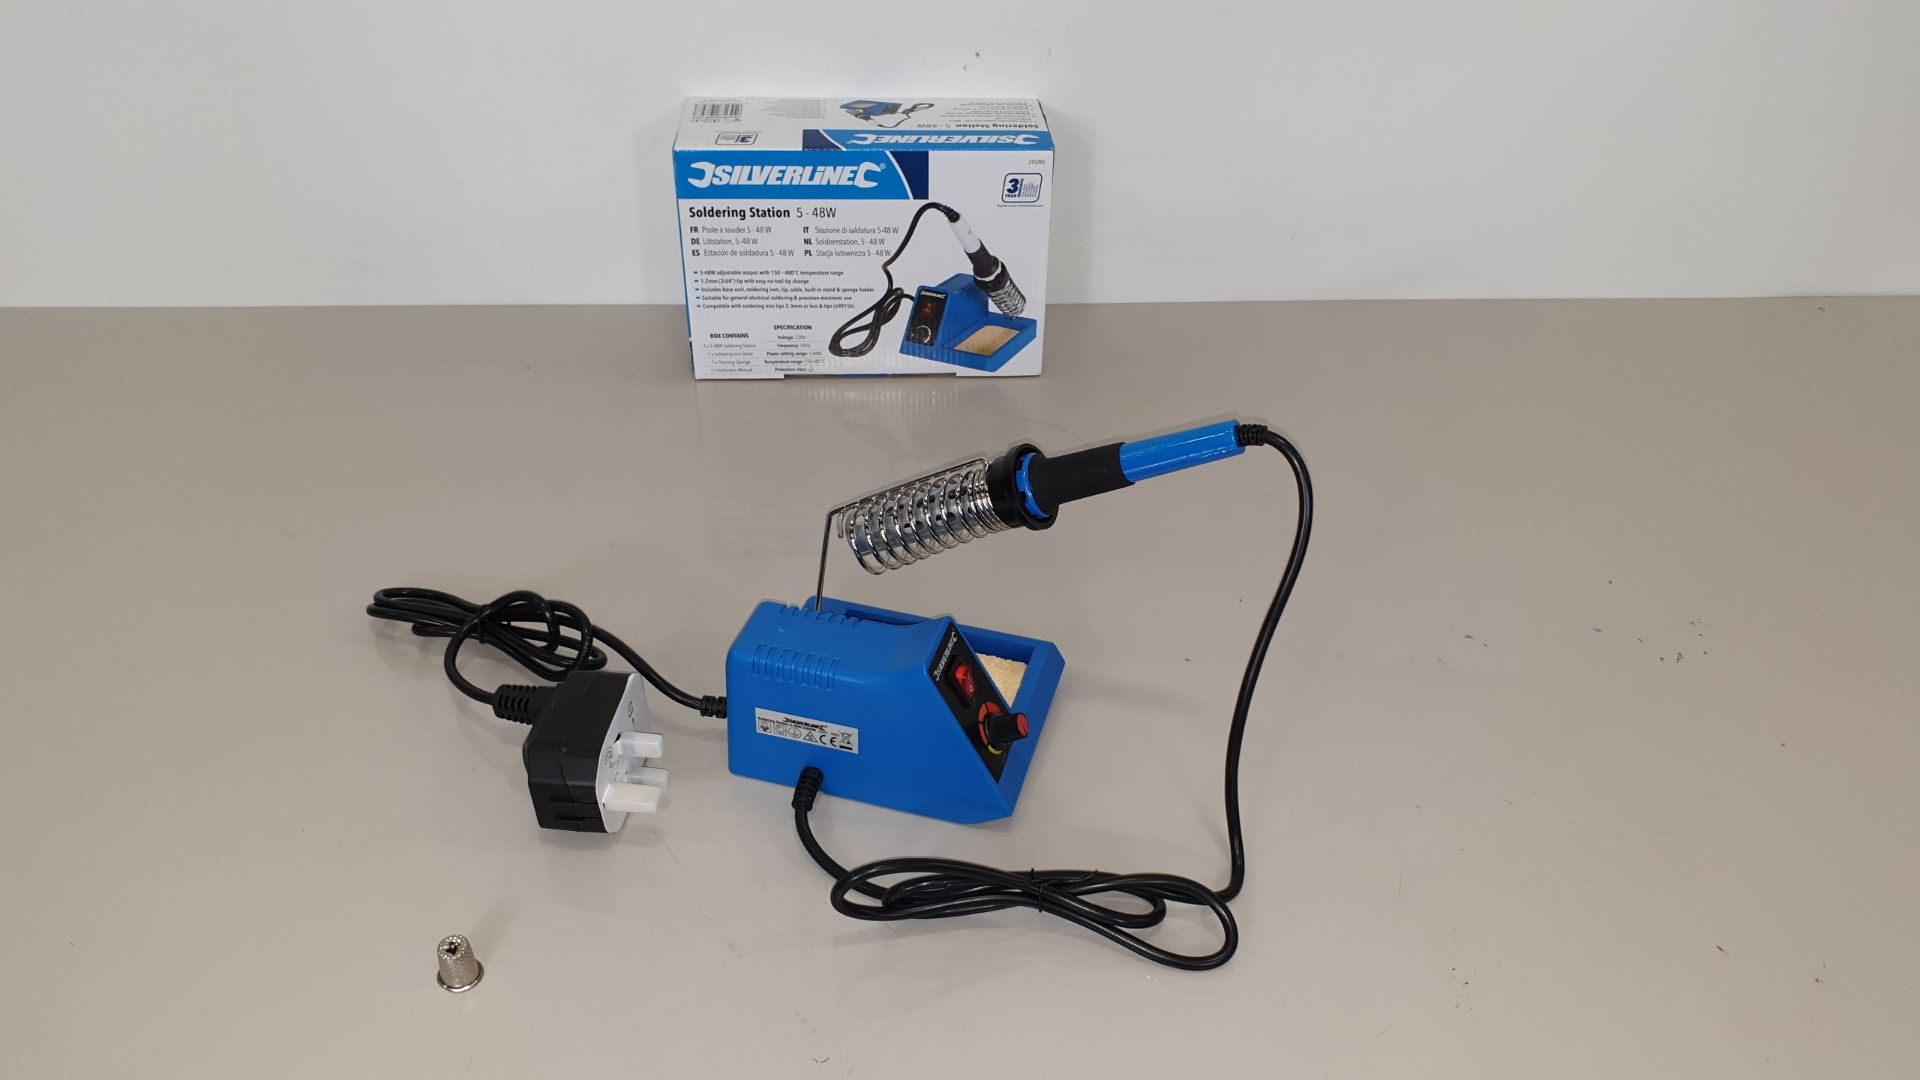 10 X BRAND NEW SILVERLINE SOLDERING STATIONS 5-48W (PROD CODE 245090) - TRADE PRICE £31.34 EACH (EXC